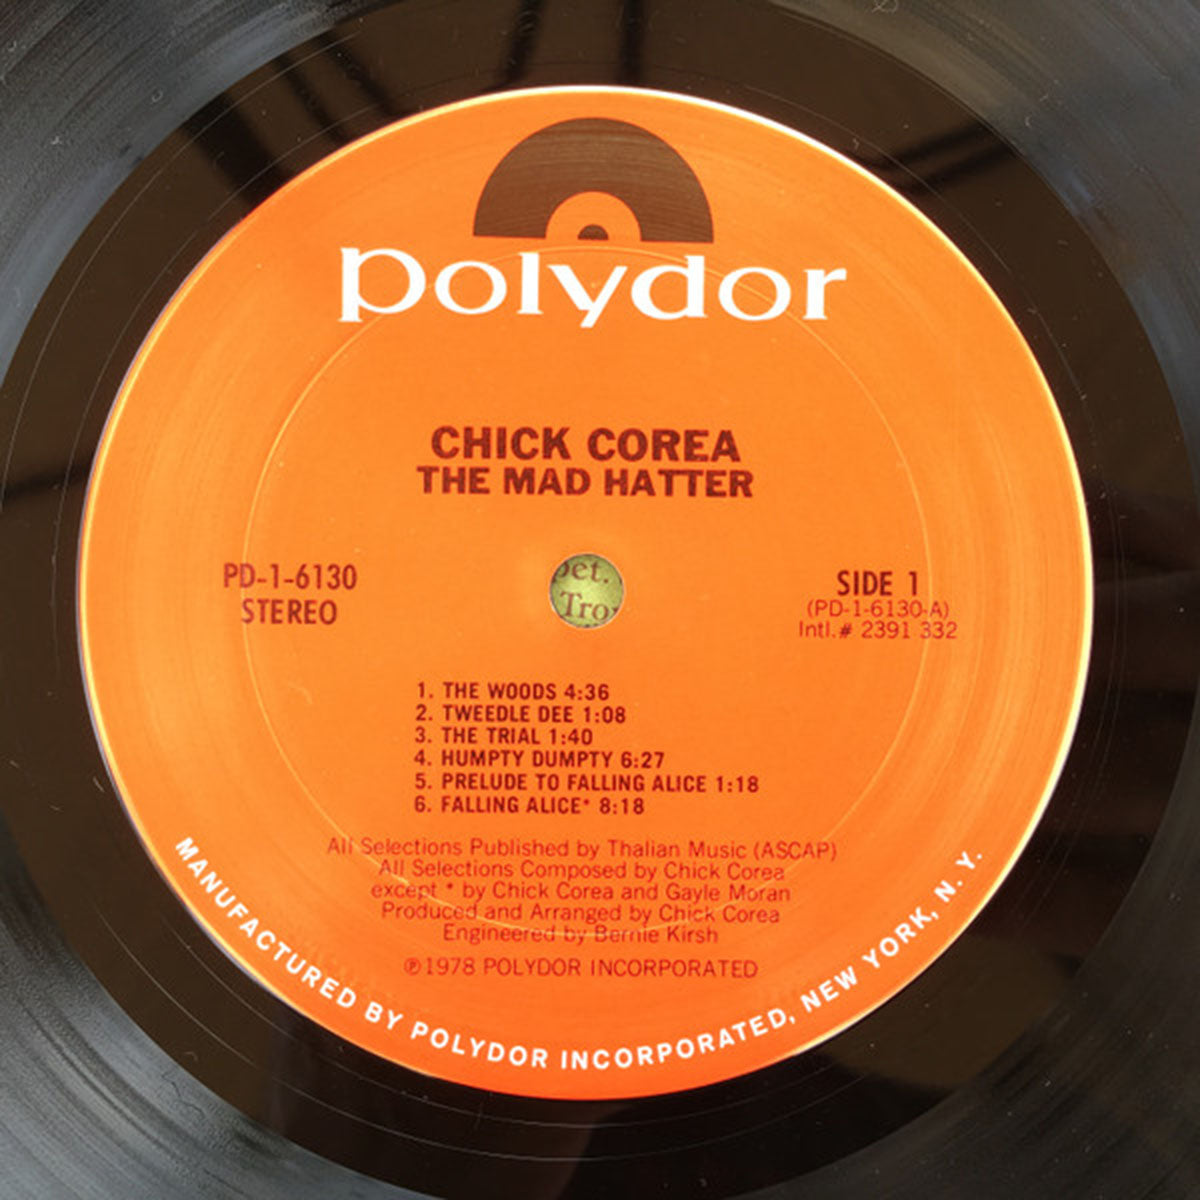 Chick Corea – The Mad Hatter - 1978 Pressing